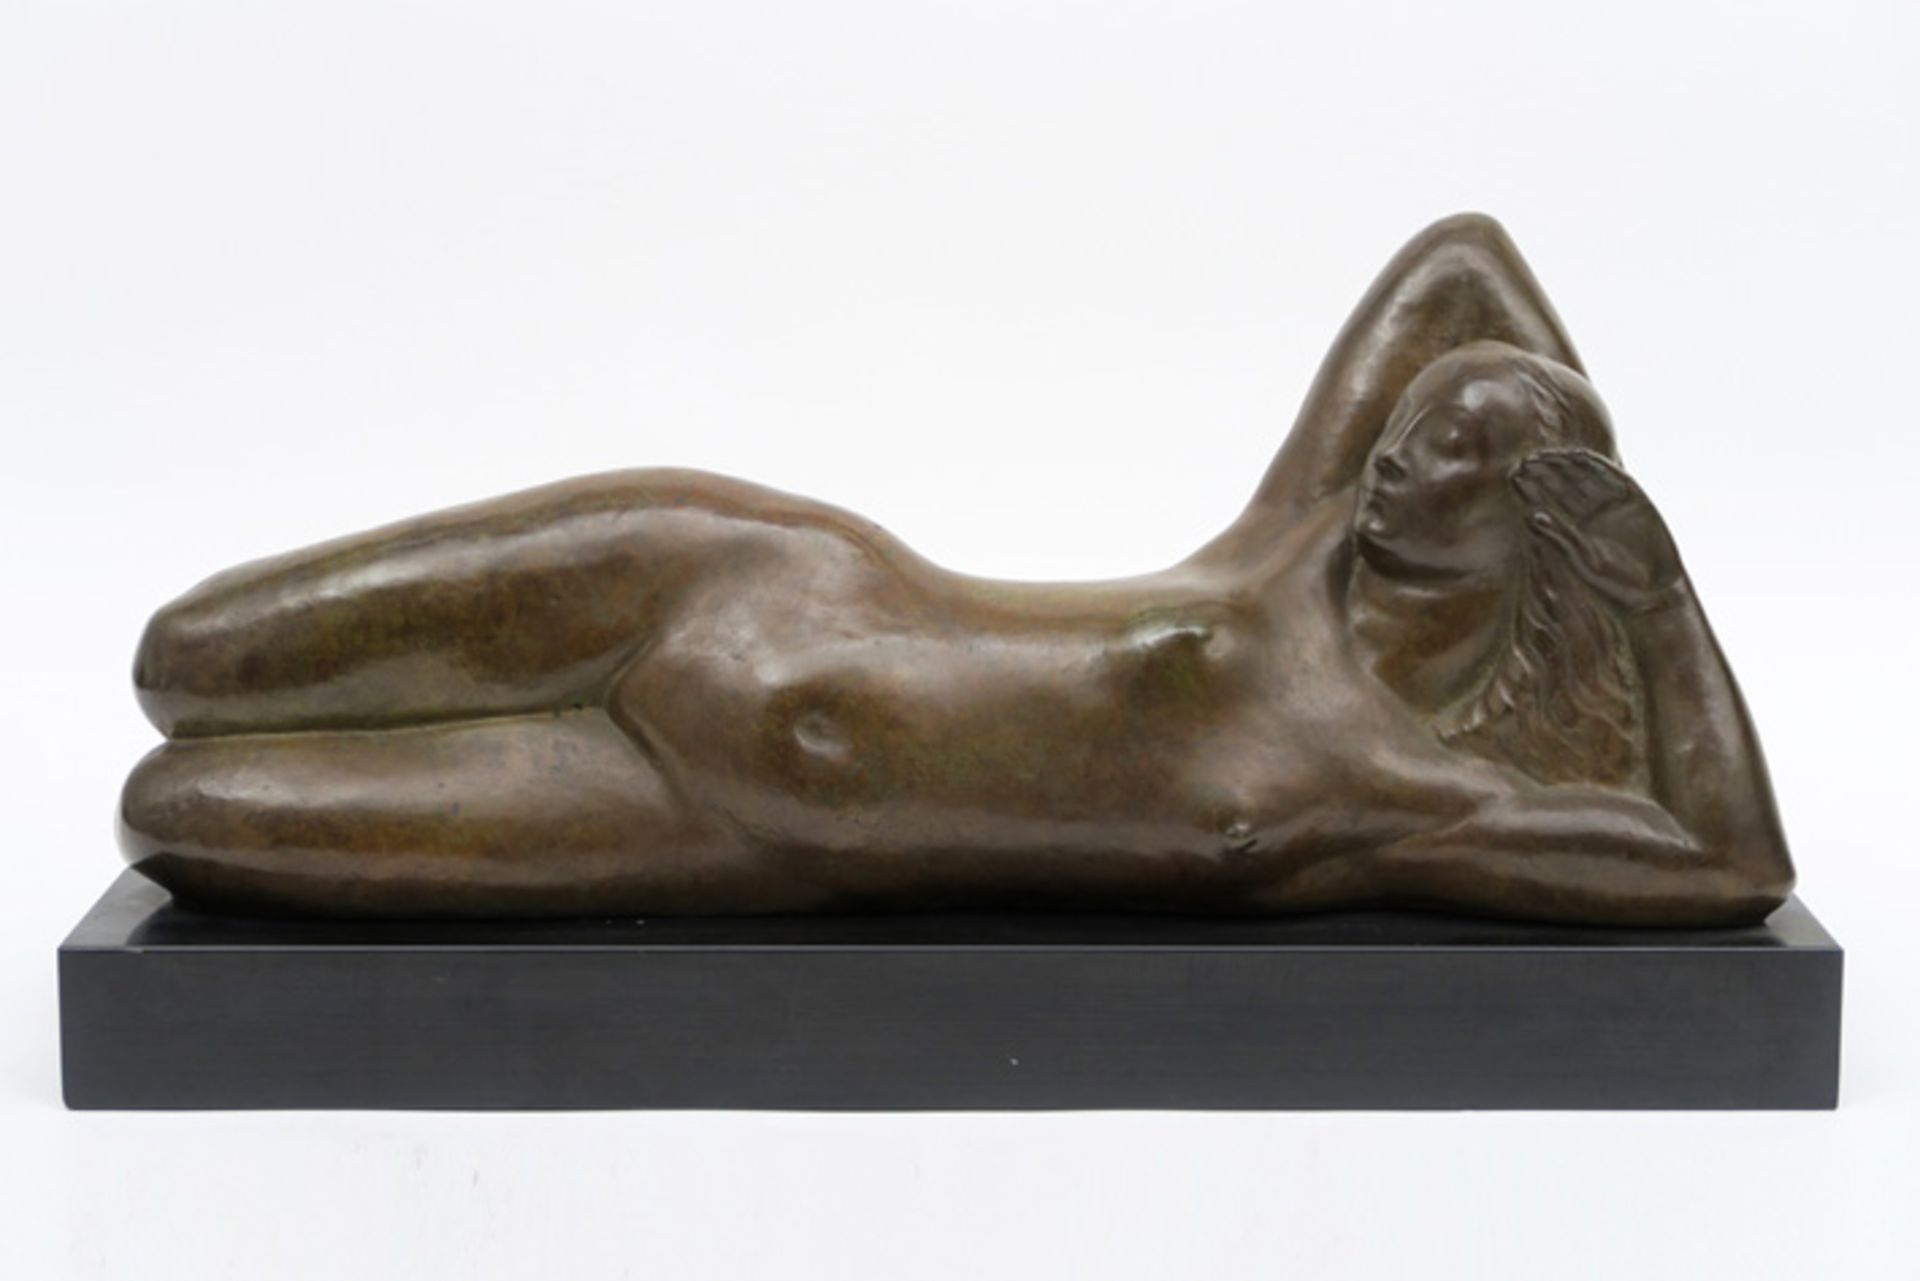 20th Cent. Belgian "reclining nude" sculpture in bronze - signed Geo Verbanck and with foundry